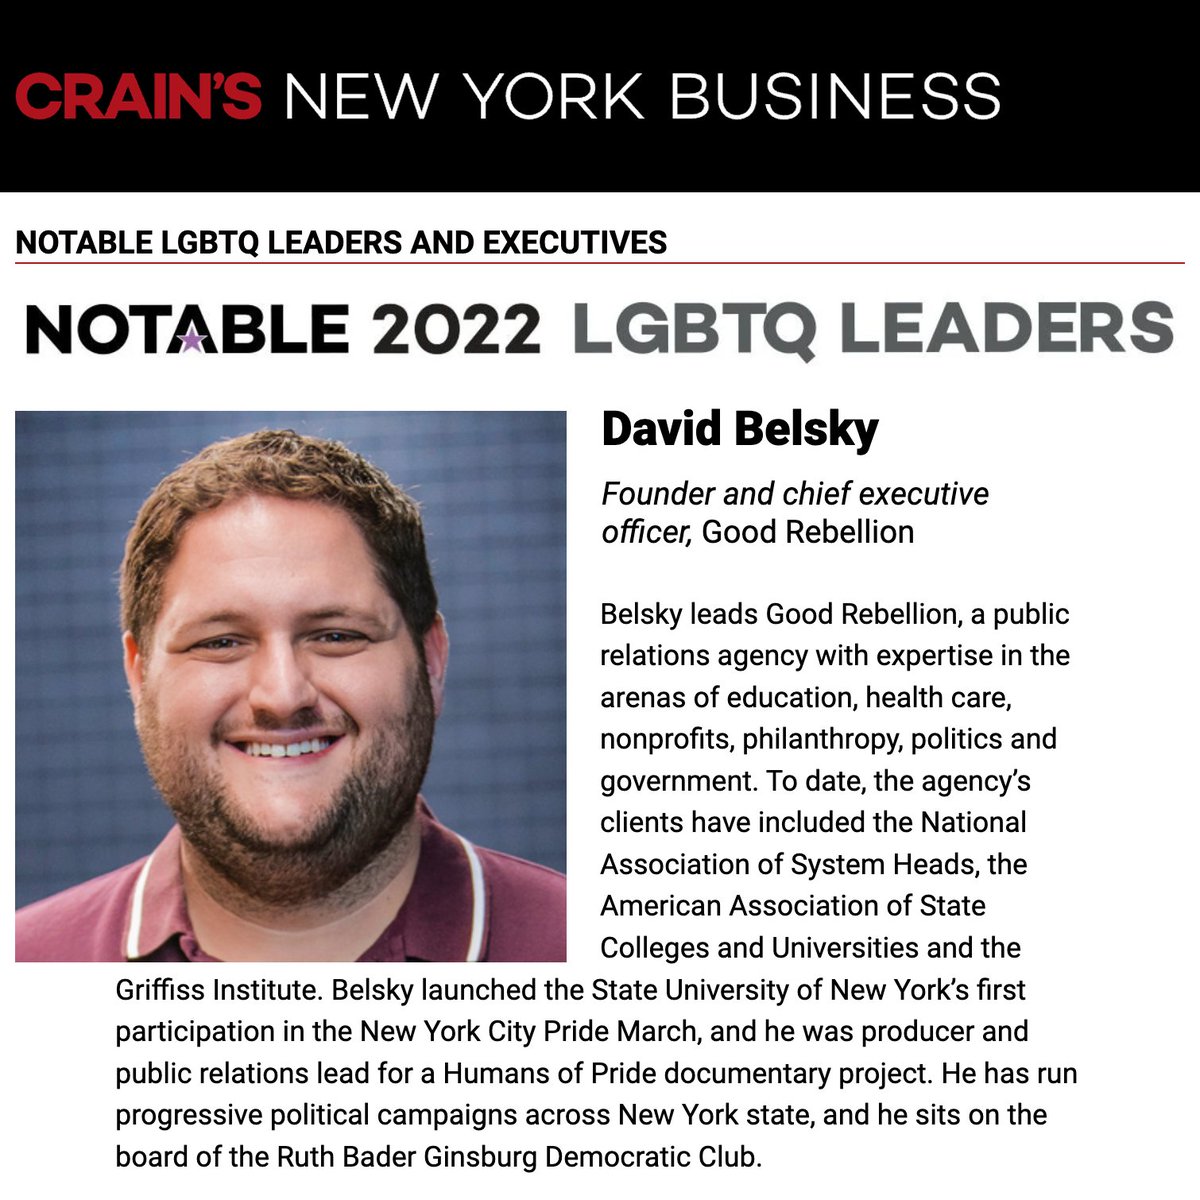 We're so PROUD of @dkbelsky who's been recognized by @CrainsNewYork as a Notable LGBTQ Leader! As a certified #LGBTBE, we're committed to meeting the needs of the queer community & ensuring their contributions to the world are reflected in our work. crainsnewyork.com/awards/2022-no…